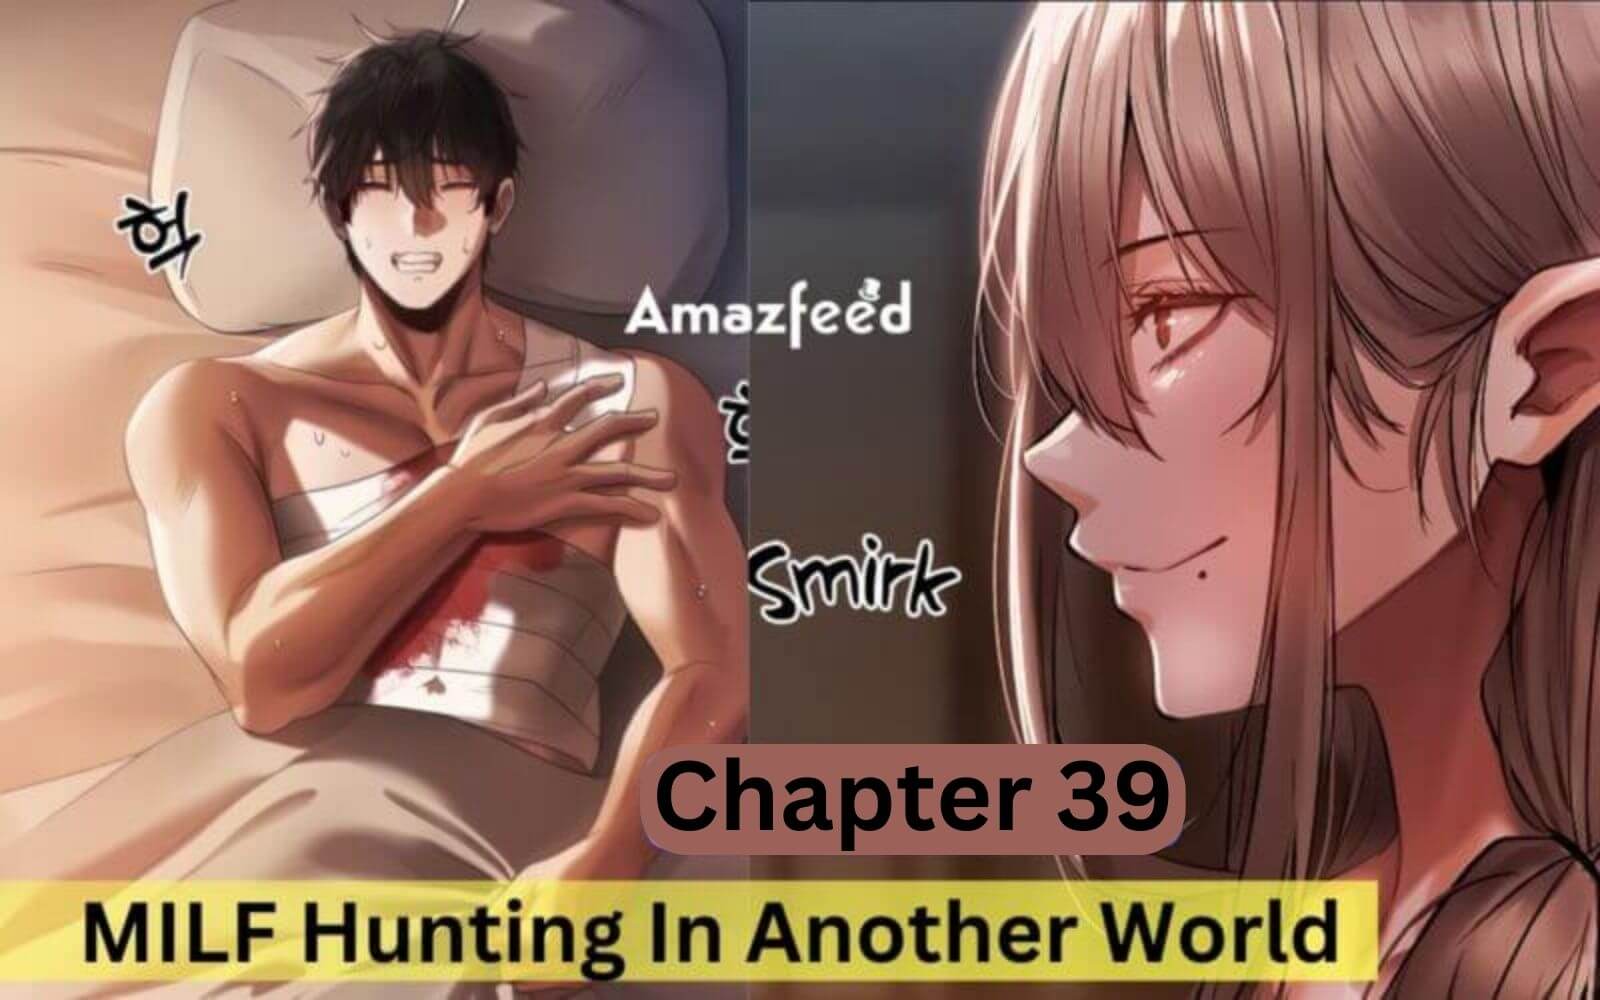 MILF Hunting In Another World Chapter 39 Release Date, Spoiler, Recap, Raw Scan & More